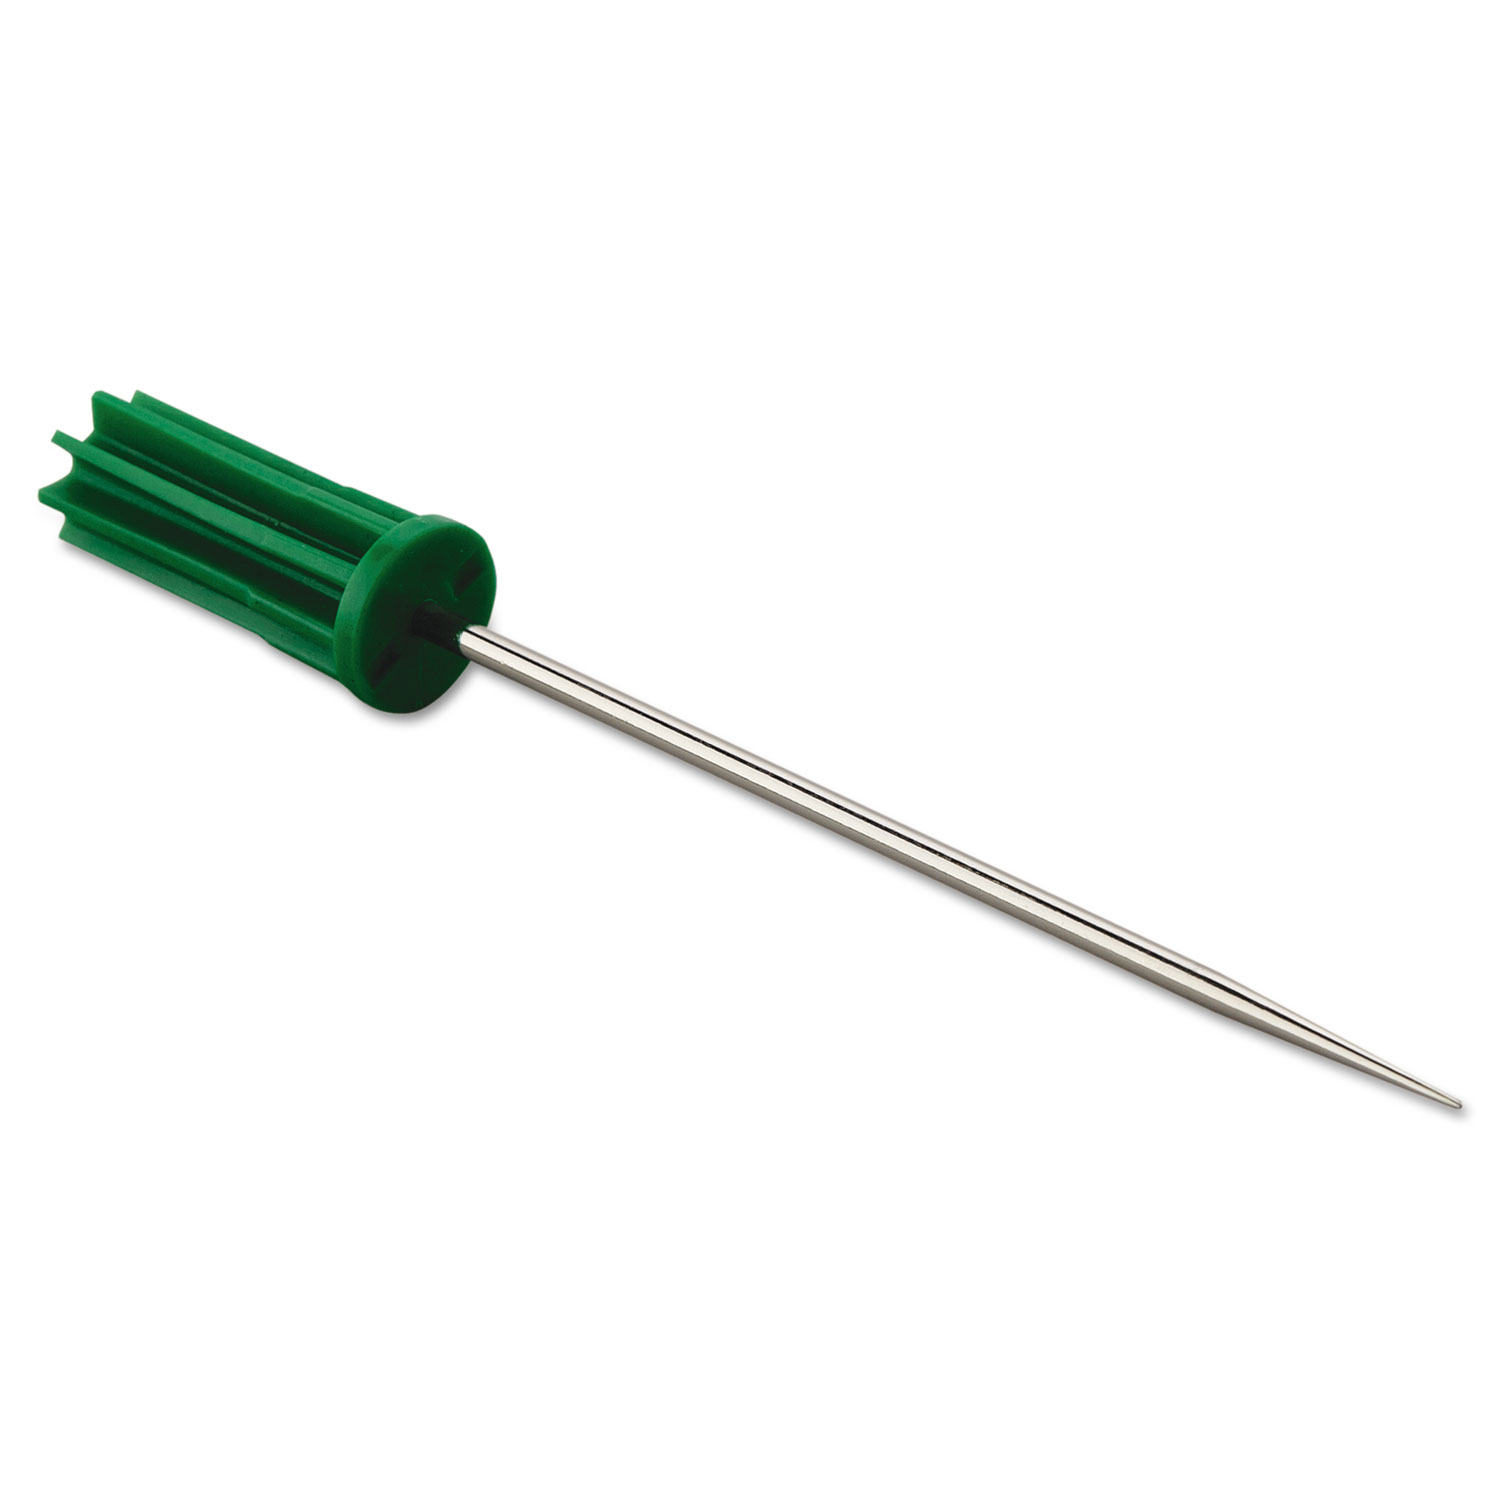 People's PaperPicker Replacement Pin Plugs, 4", Stainless Steel/Green